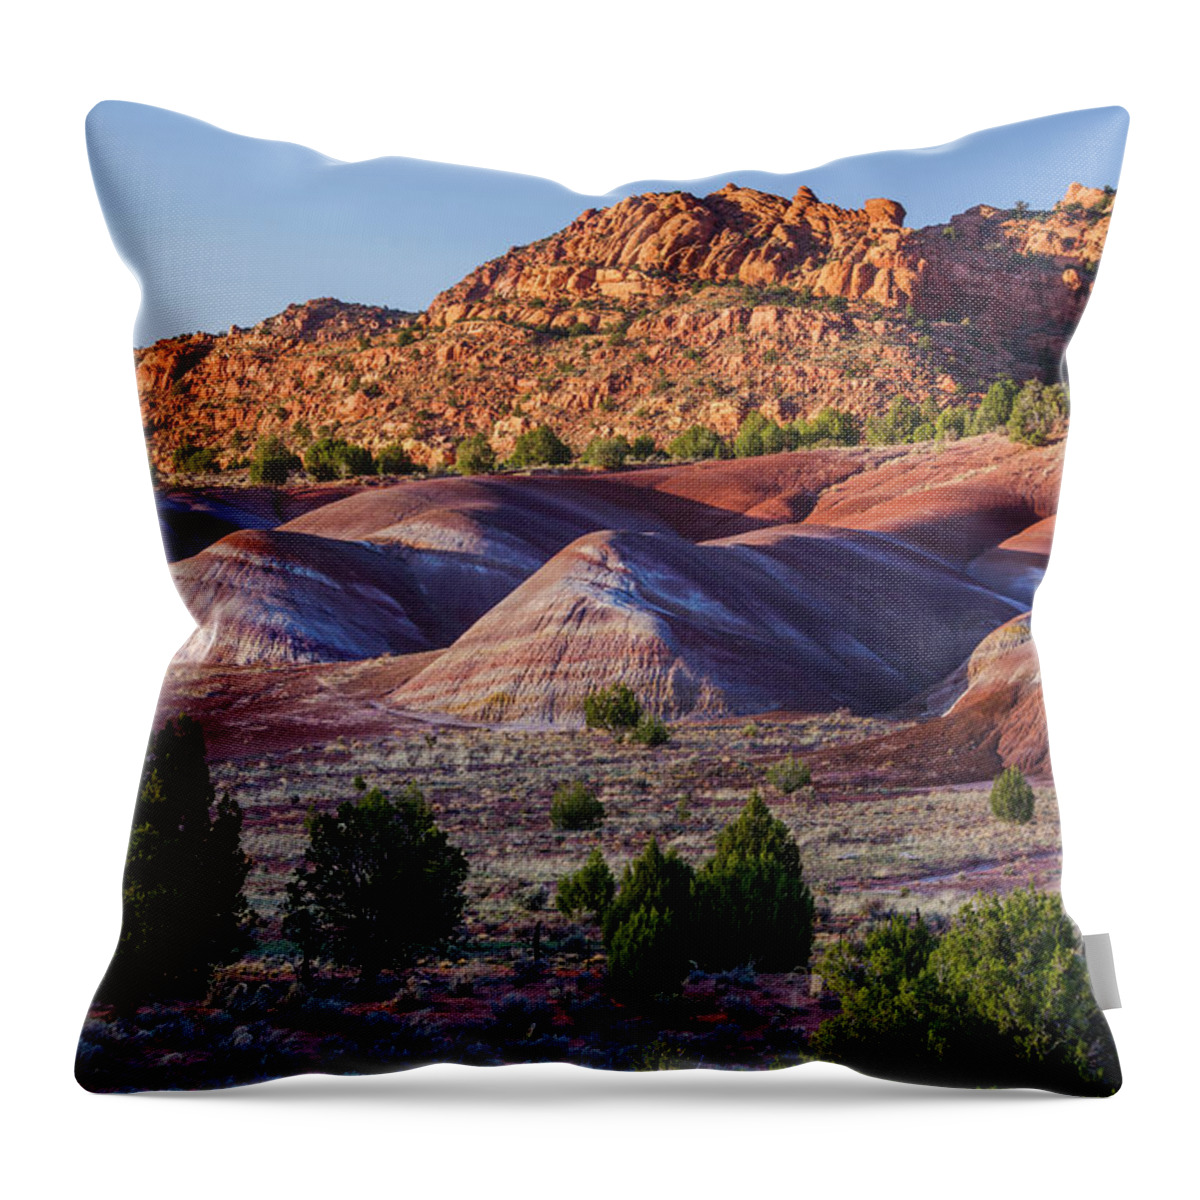 Tranquility Throw Pillow featuring the photograph Sand Stone Rock Formation In Sw Usa #2 by Gavriel Jecan